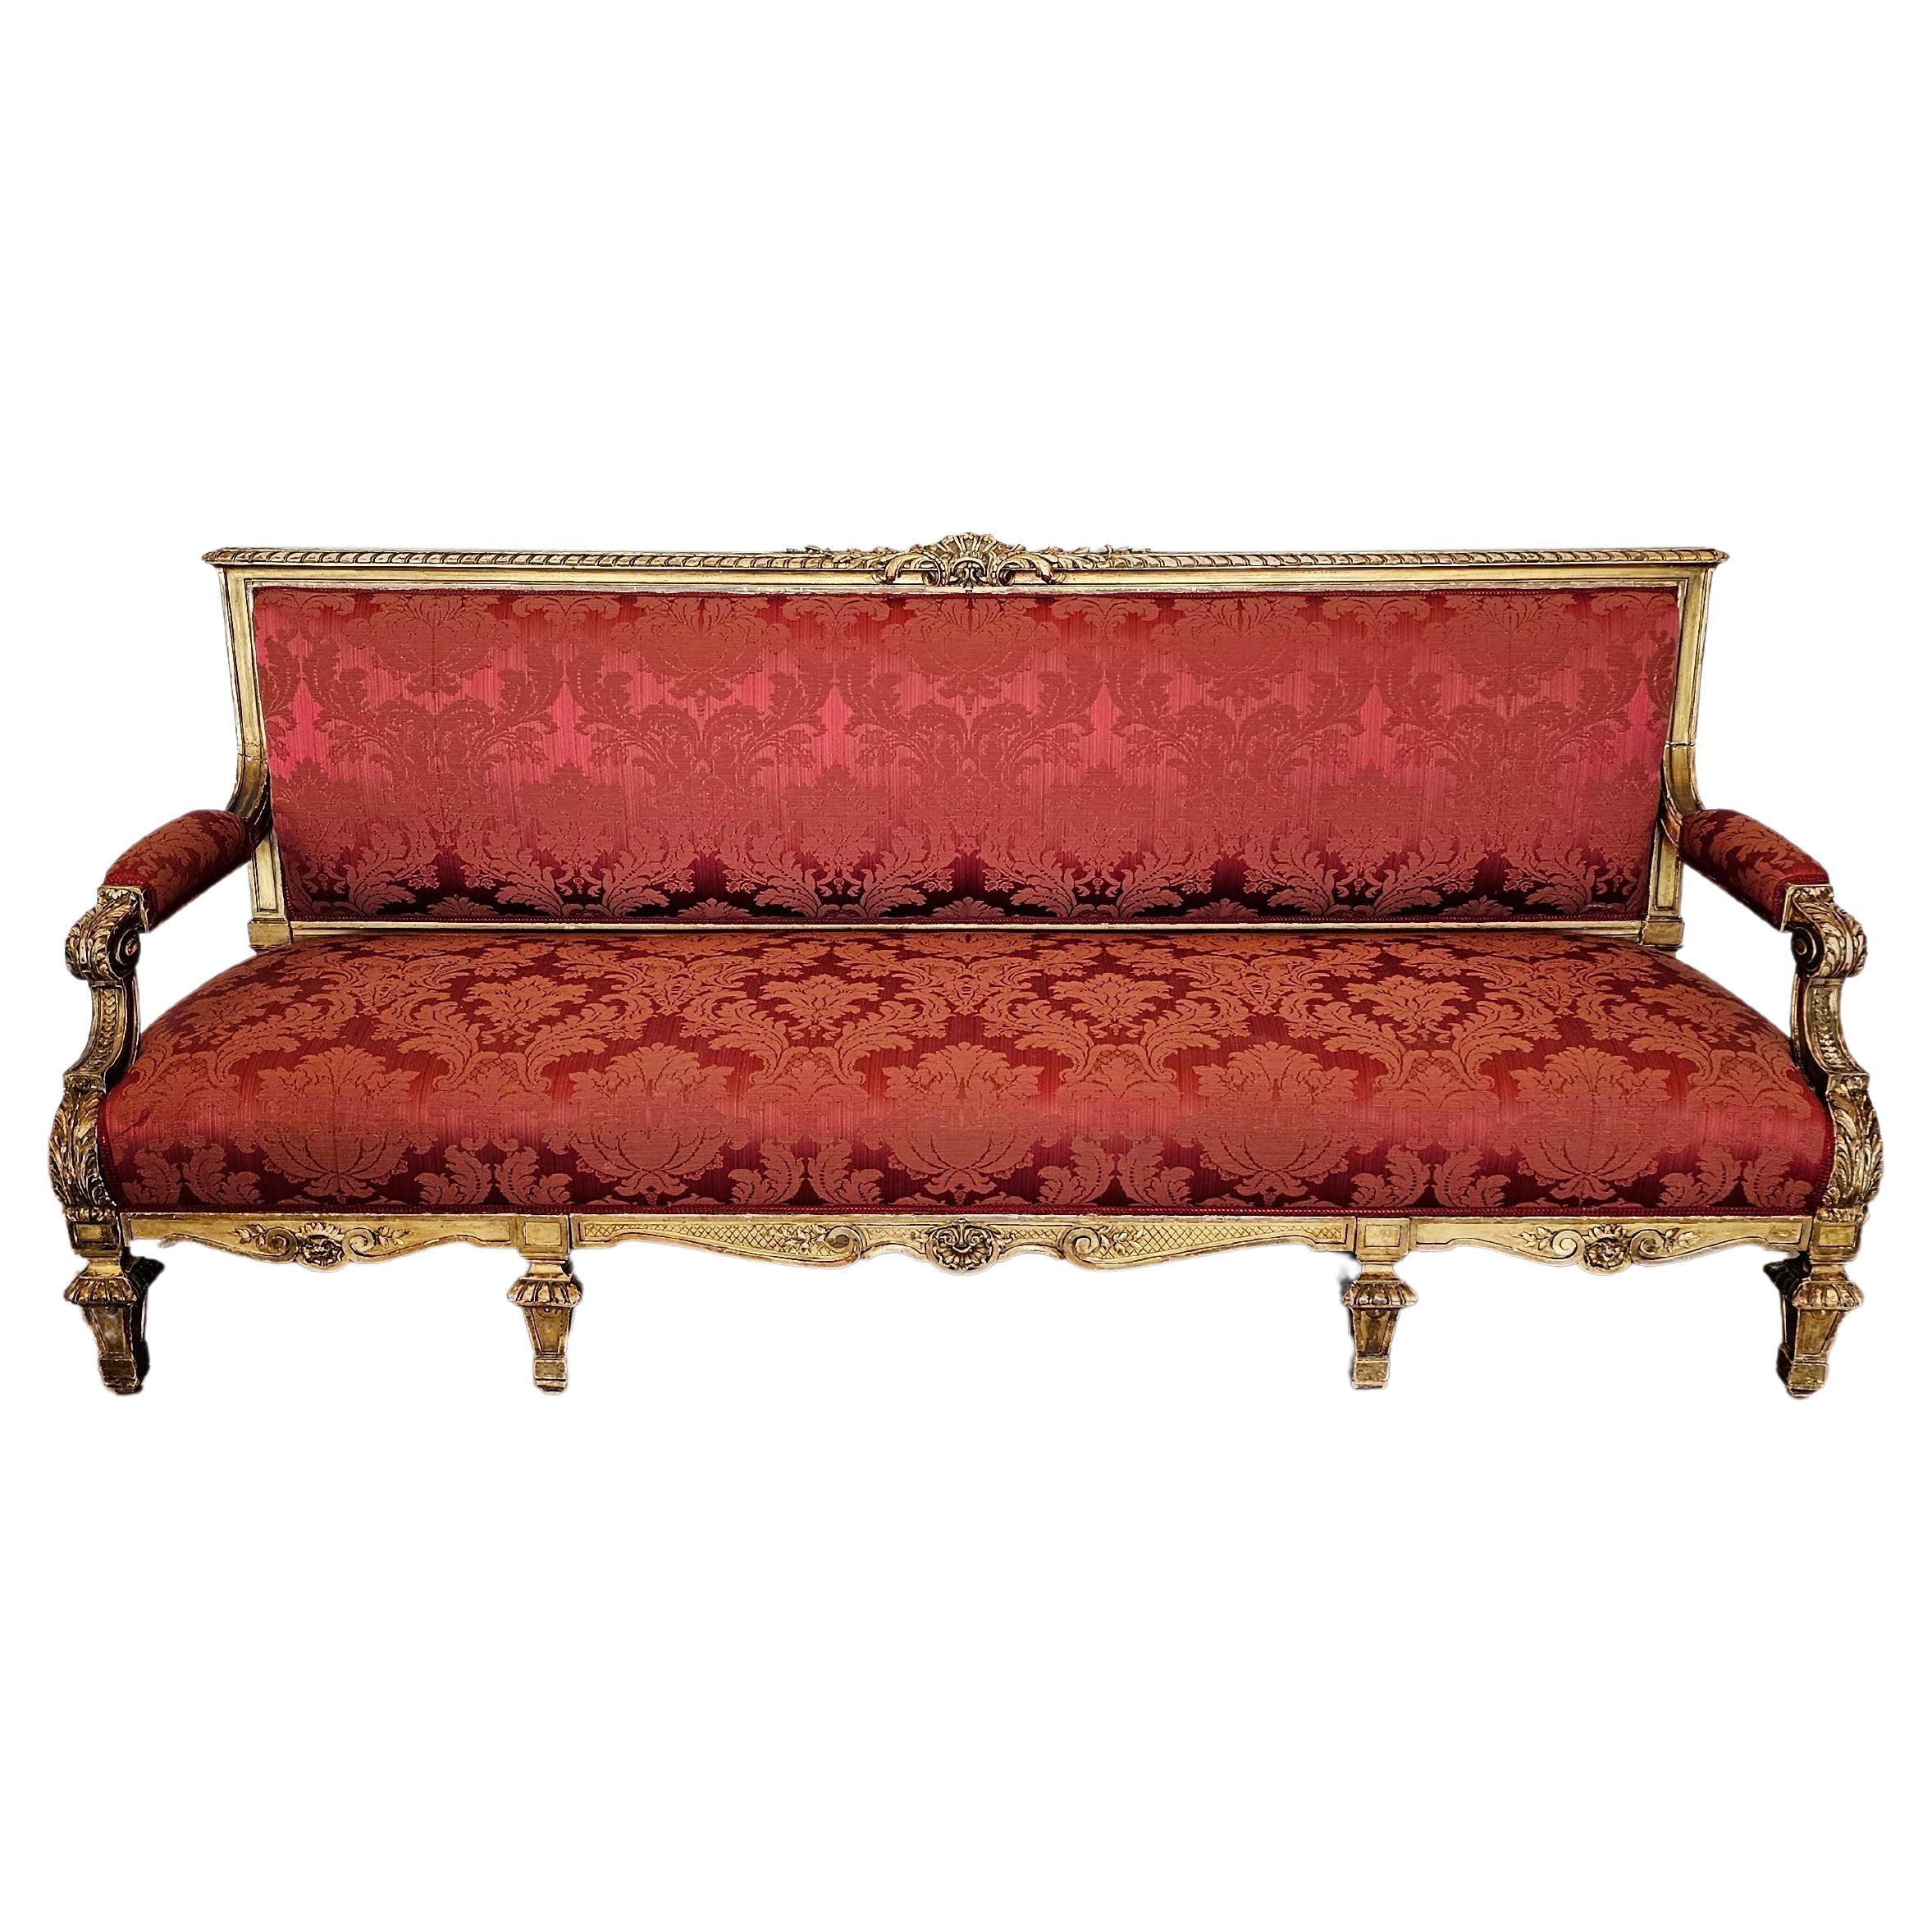 Antique French Louis XVI Style Giltwood Damask Upholstered Long Sofa Set For Sale